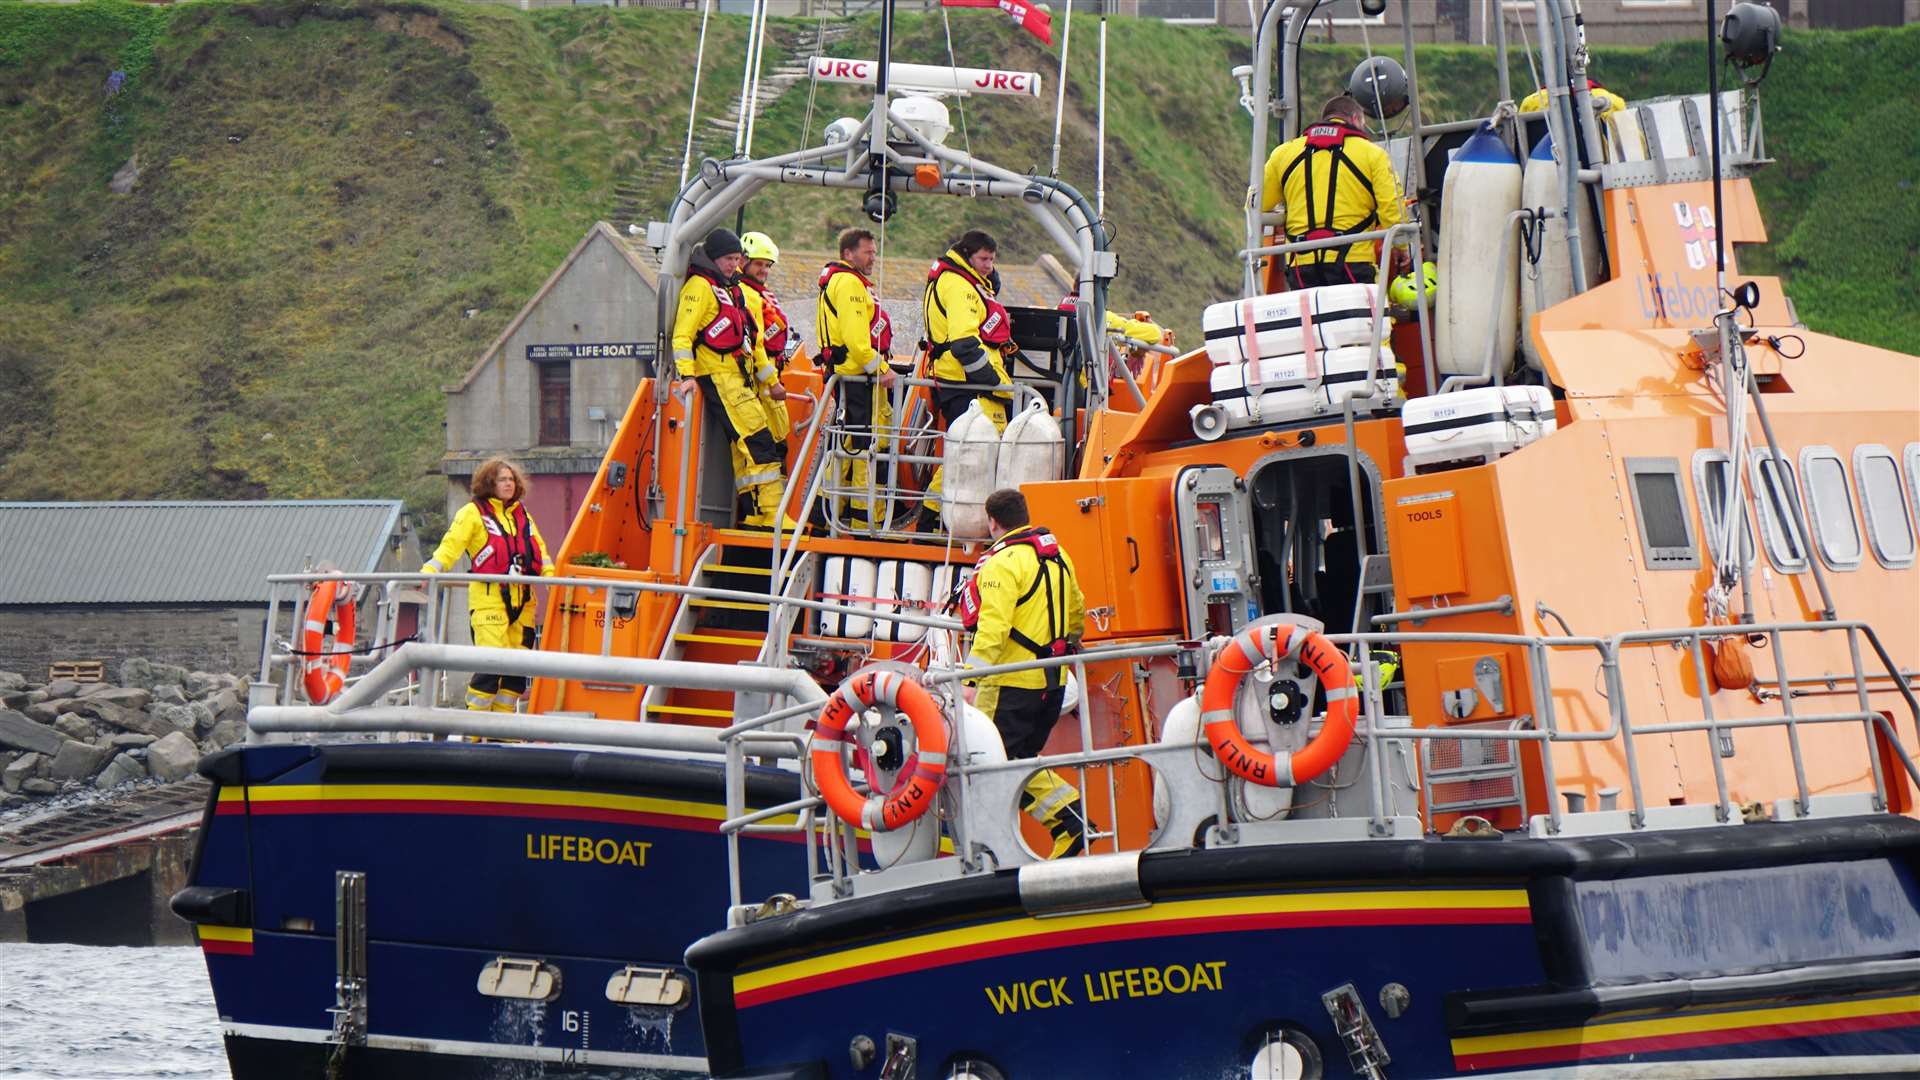 The two RNLI lifeboats that played a prominent role in the flotilla. Picture: DGS